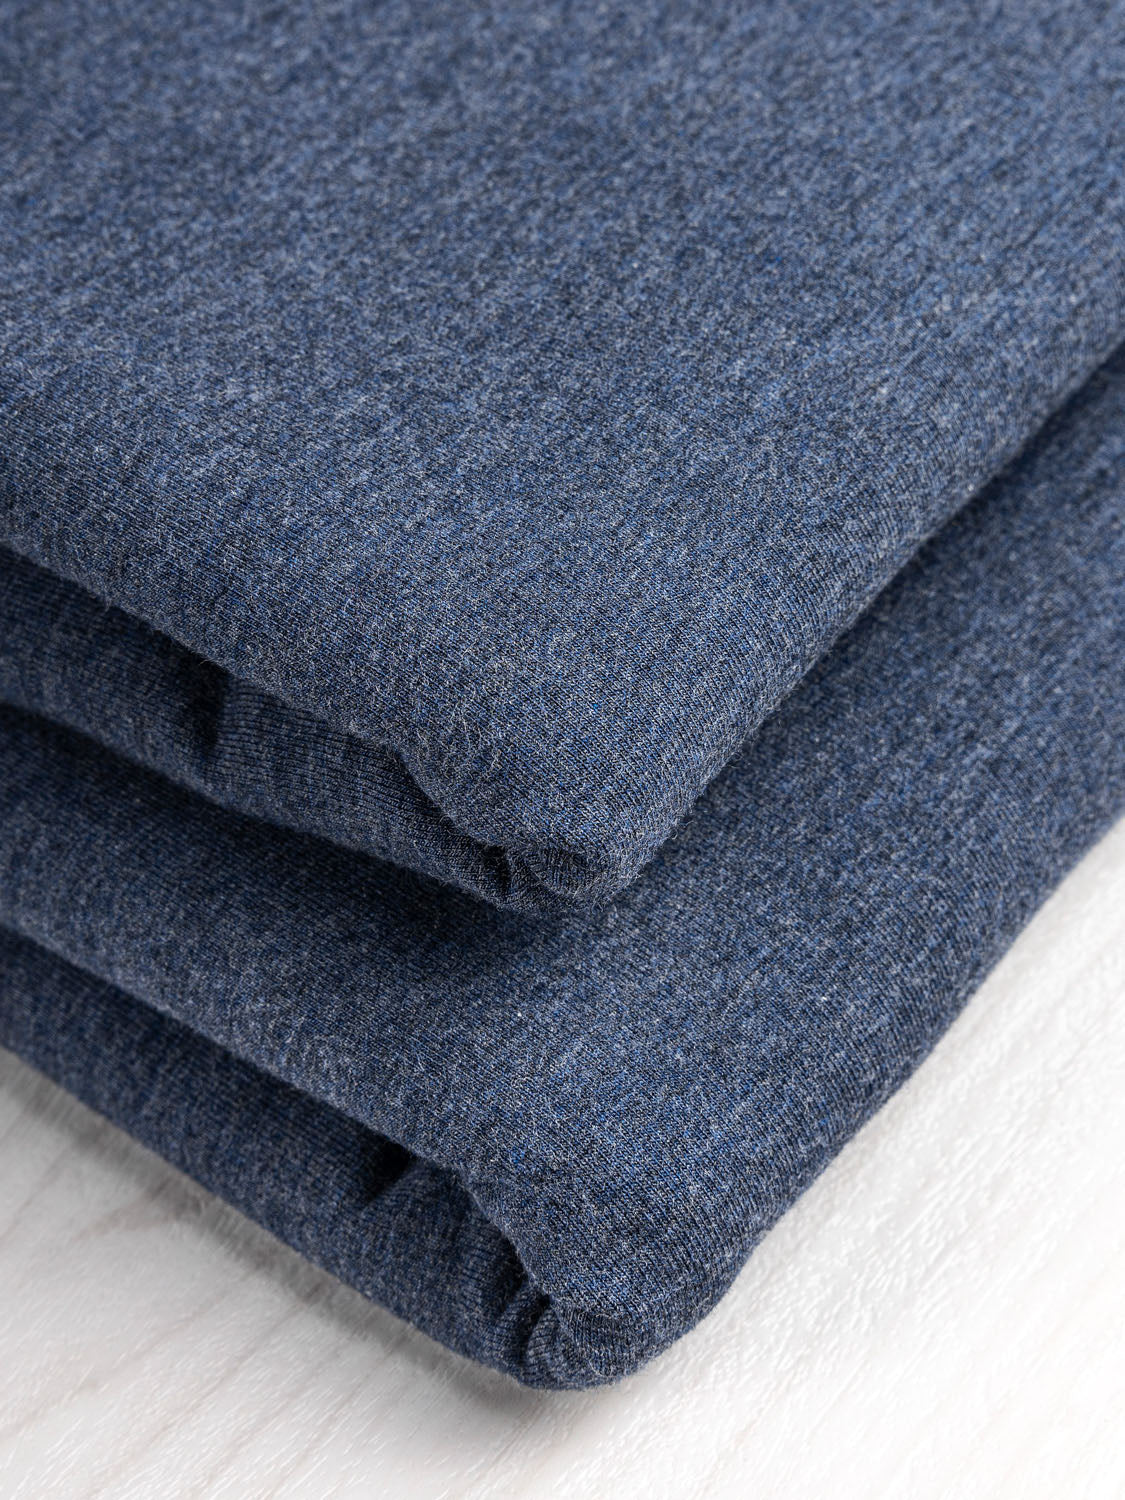 Bamboo Stretch 2x2 Rib Knit Fabric by the yard or Wholesale, Heather Navy  or Lake